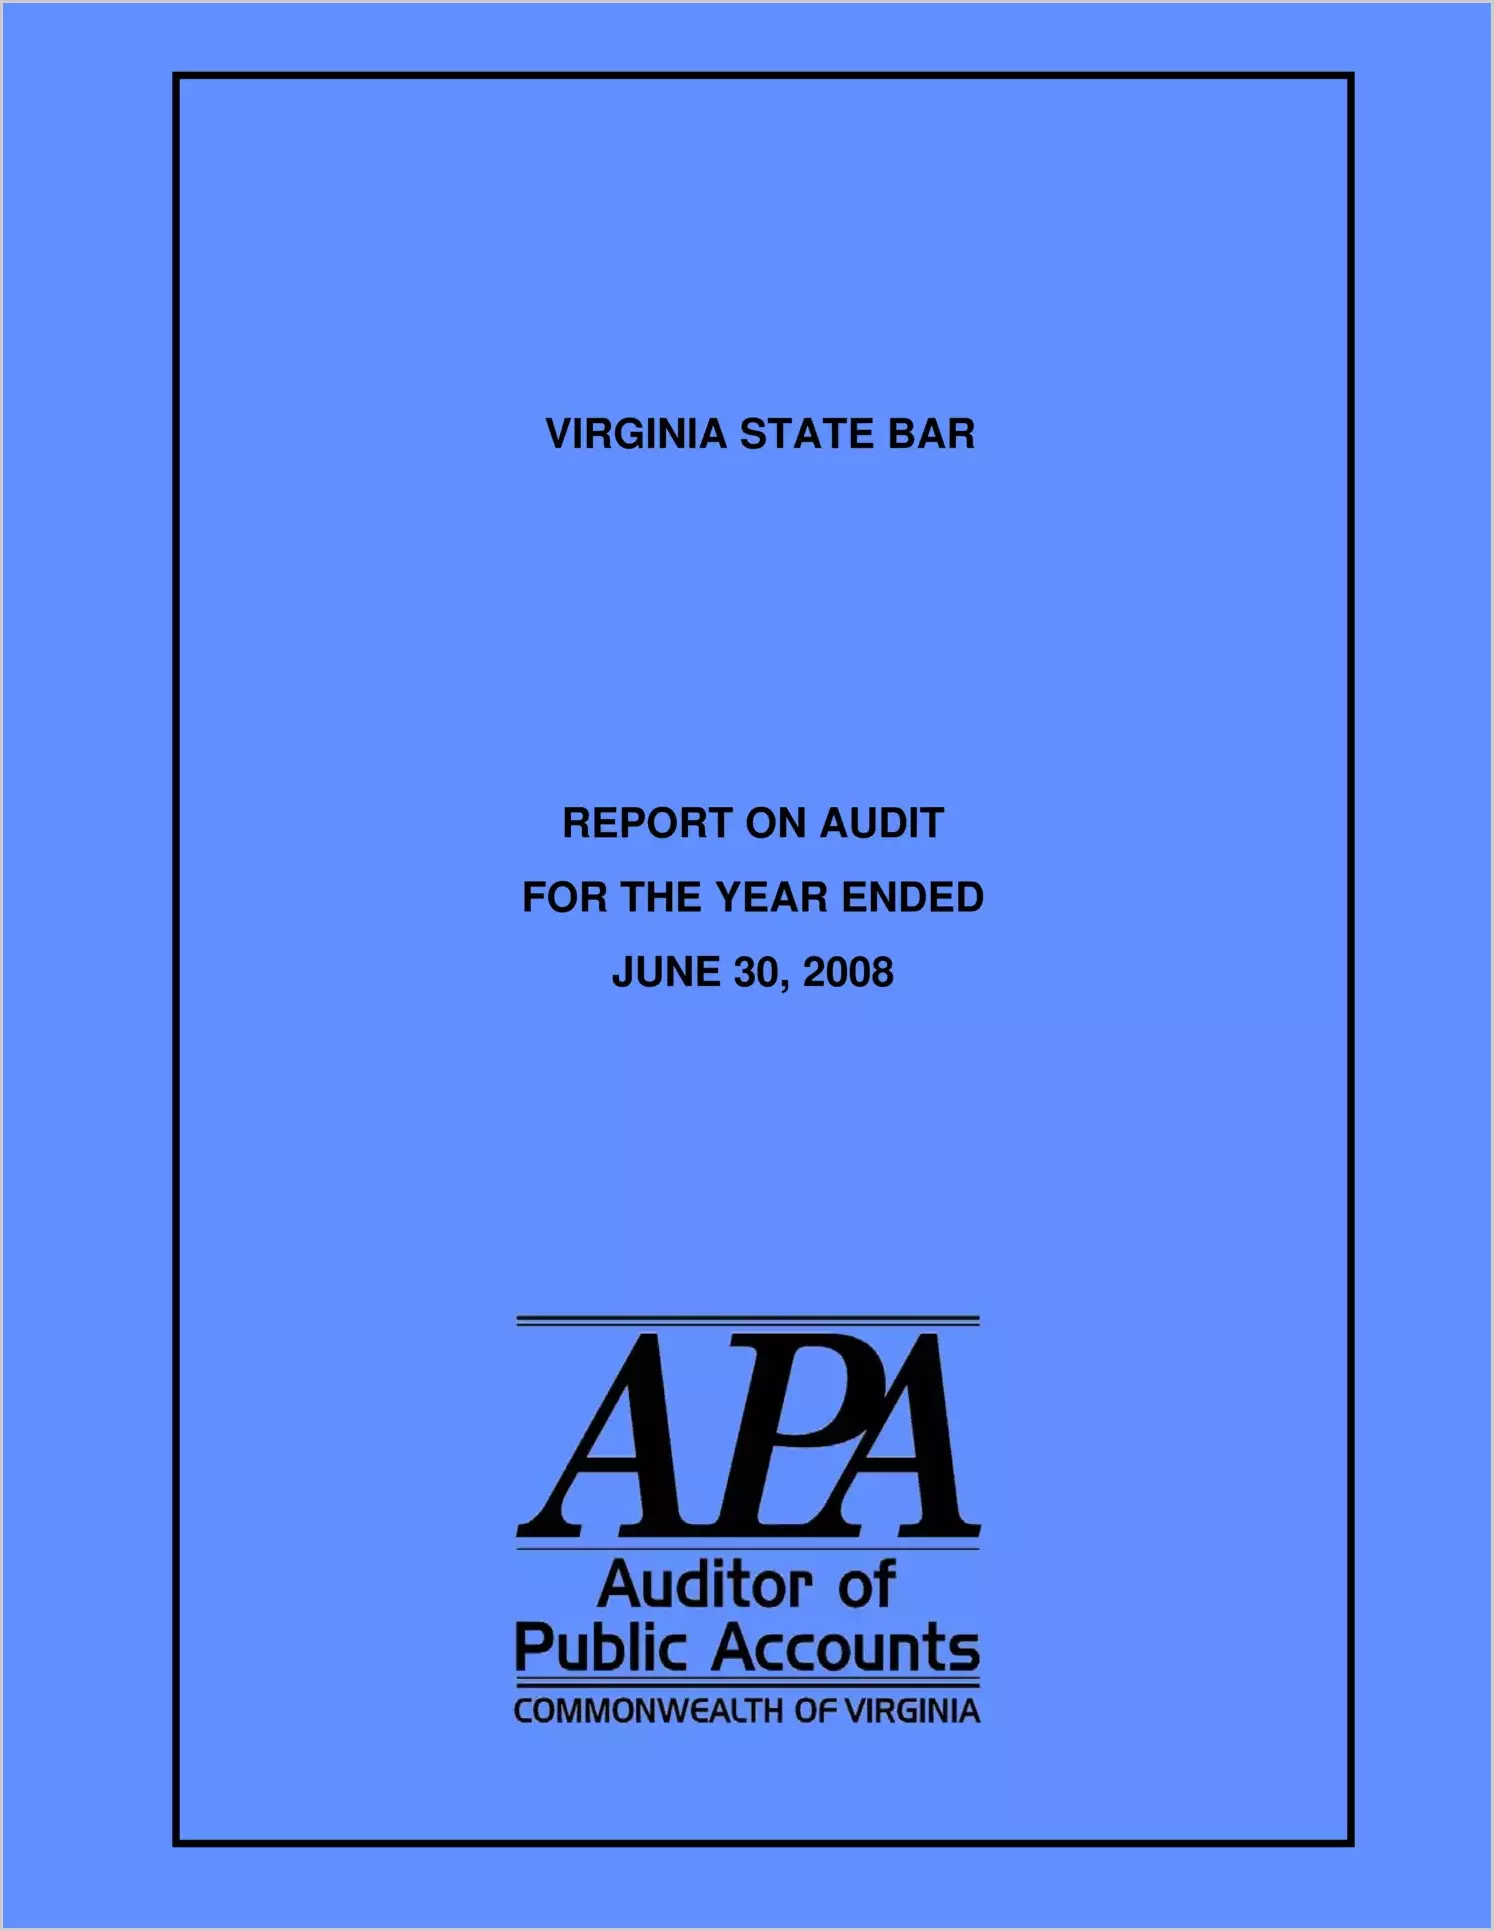 Virginia State Bar for the year ended June 30, 2008